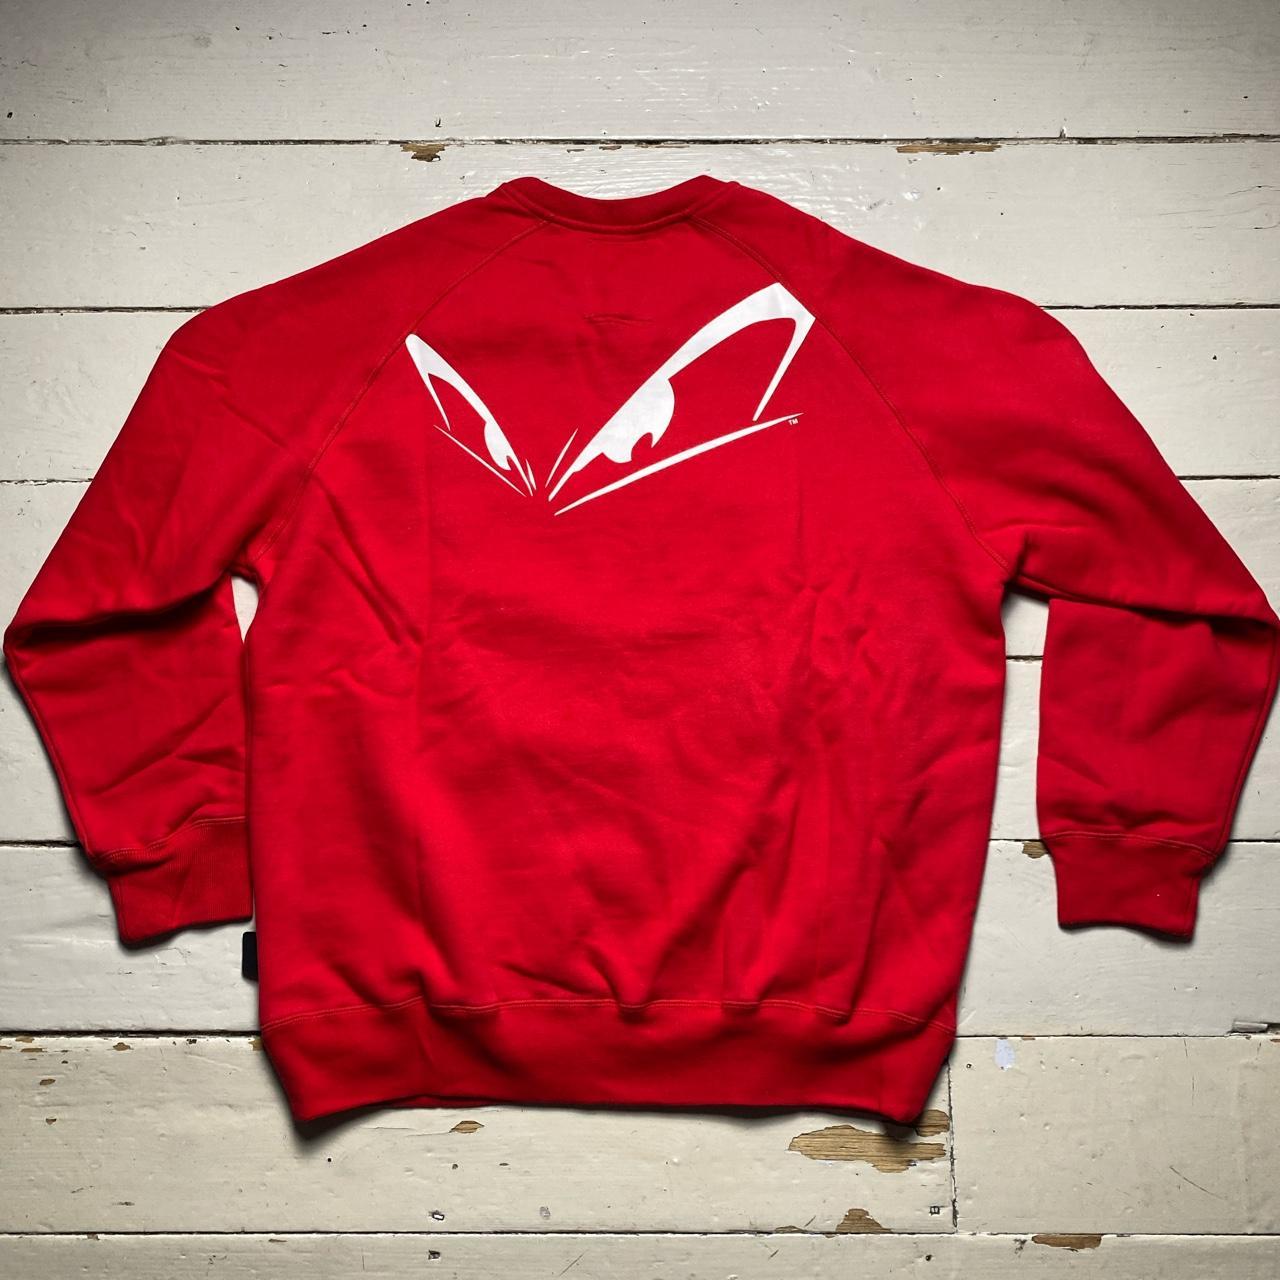 Streetz Is Watchin No Fear Elsinore Eyes Grime Y2K Red and White Jumper